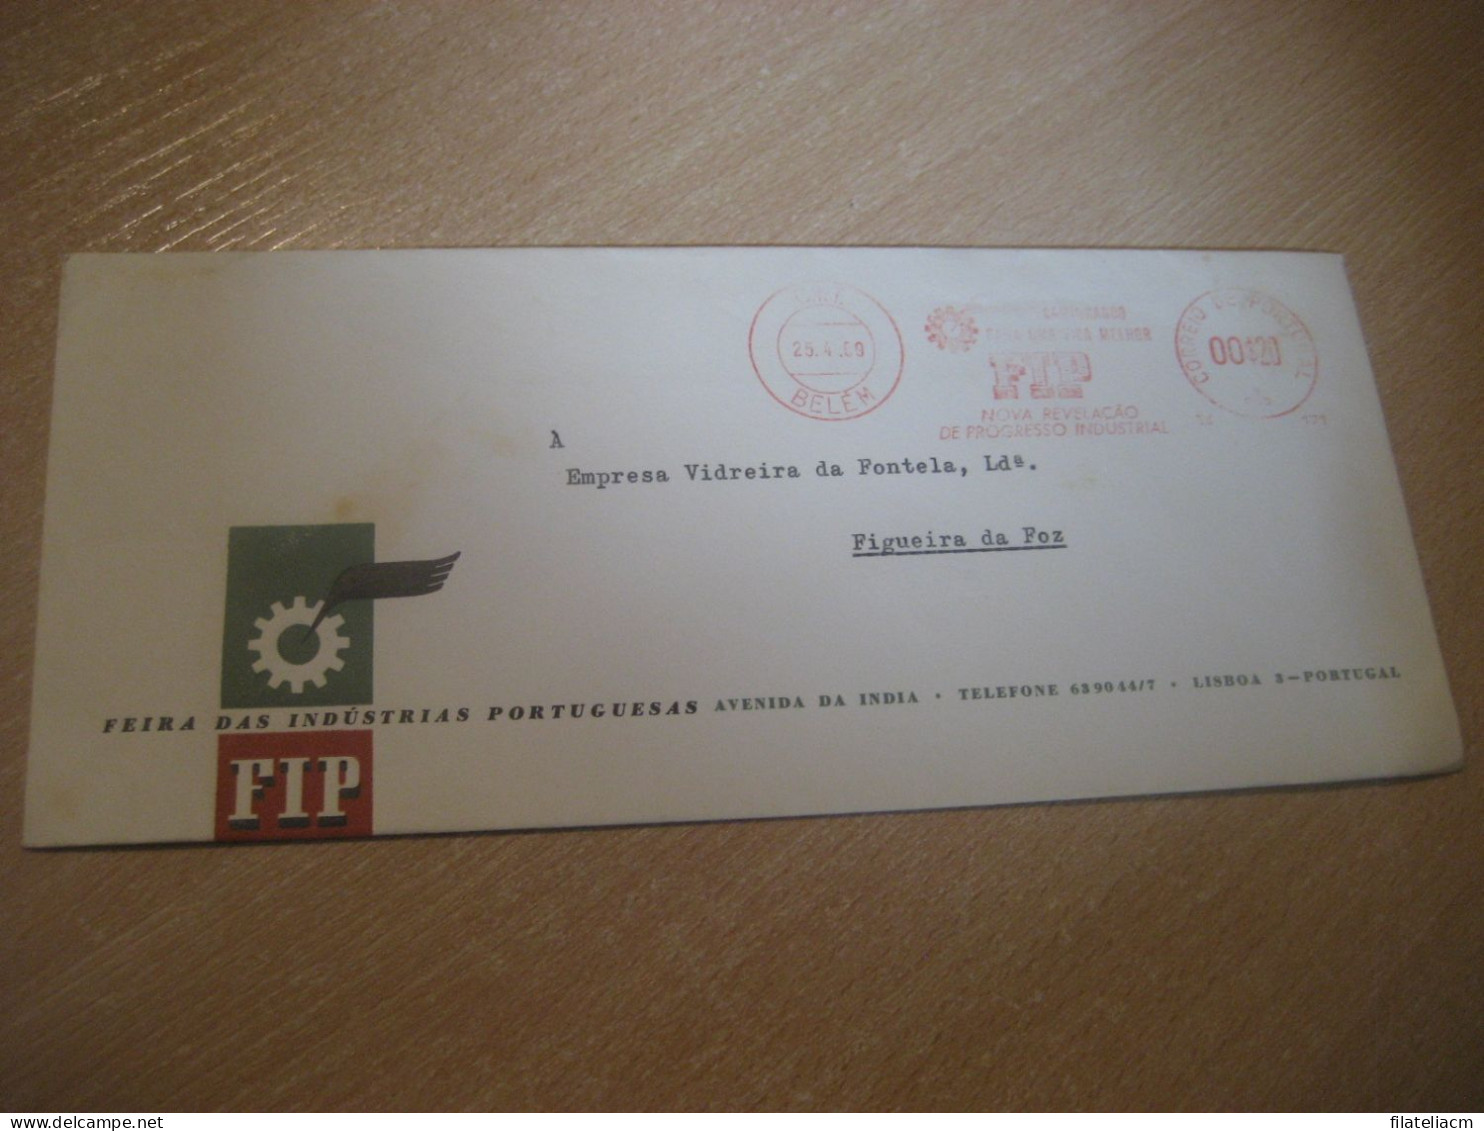 BELEM 1959 To Figueira Da Foz FIP Feira Das Industrias Industry Fair Meter Mail Cancel Cover PORTUGAL - Covers & Documents